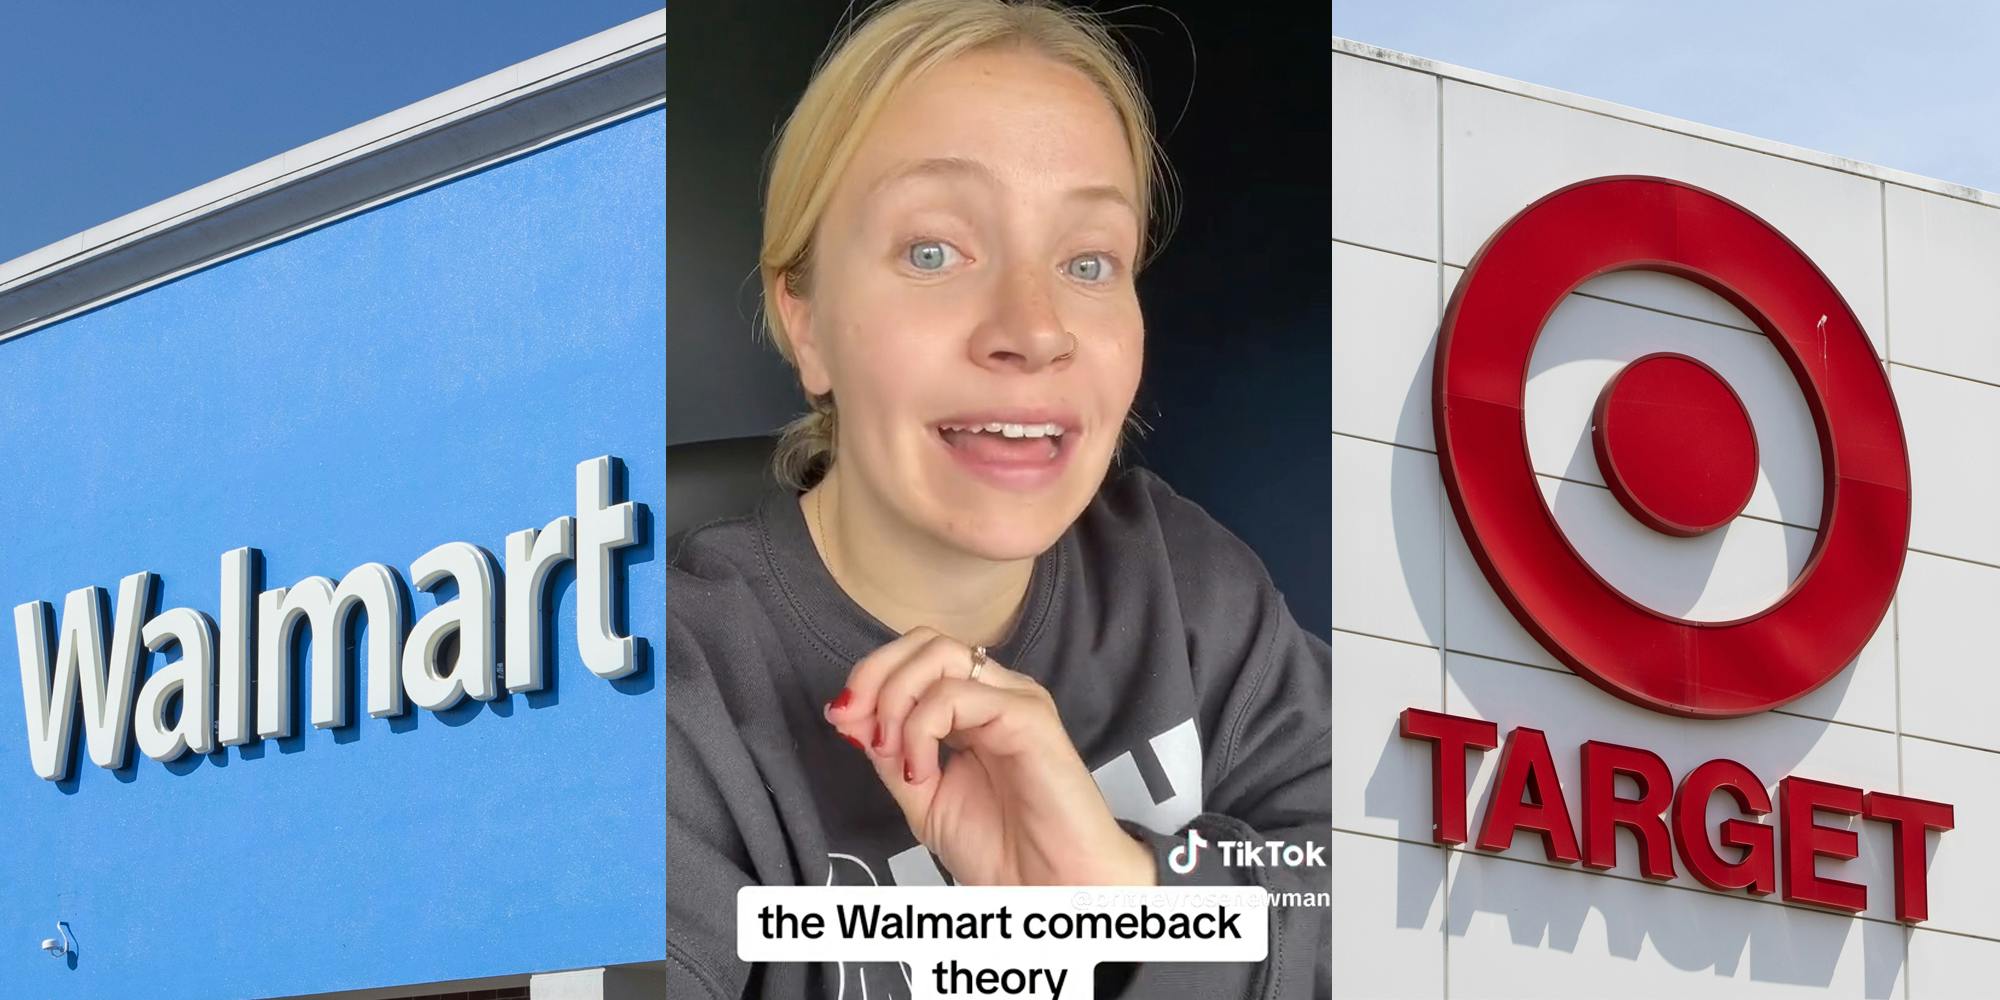 Outside of store Walmart logo on blue wall(l), Blonde woman speaking with text below that says "the walmart comeback theory"(c), A target logo and text outside of store(r)